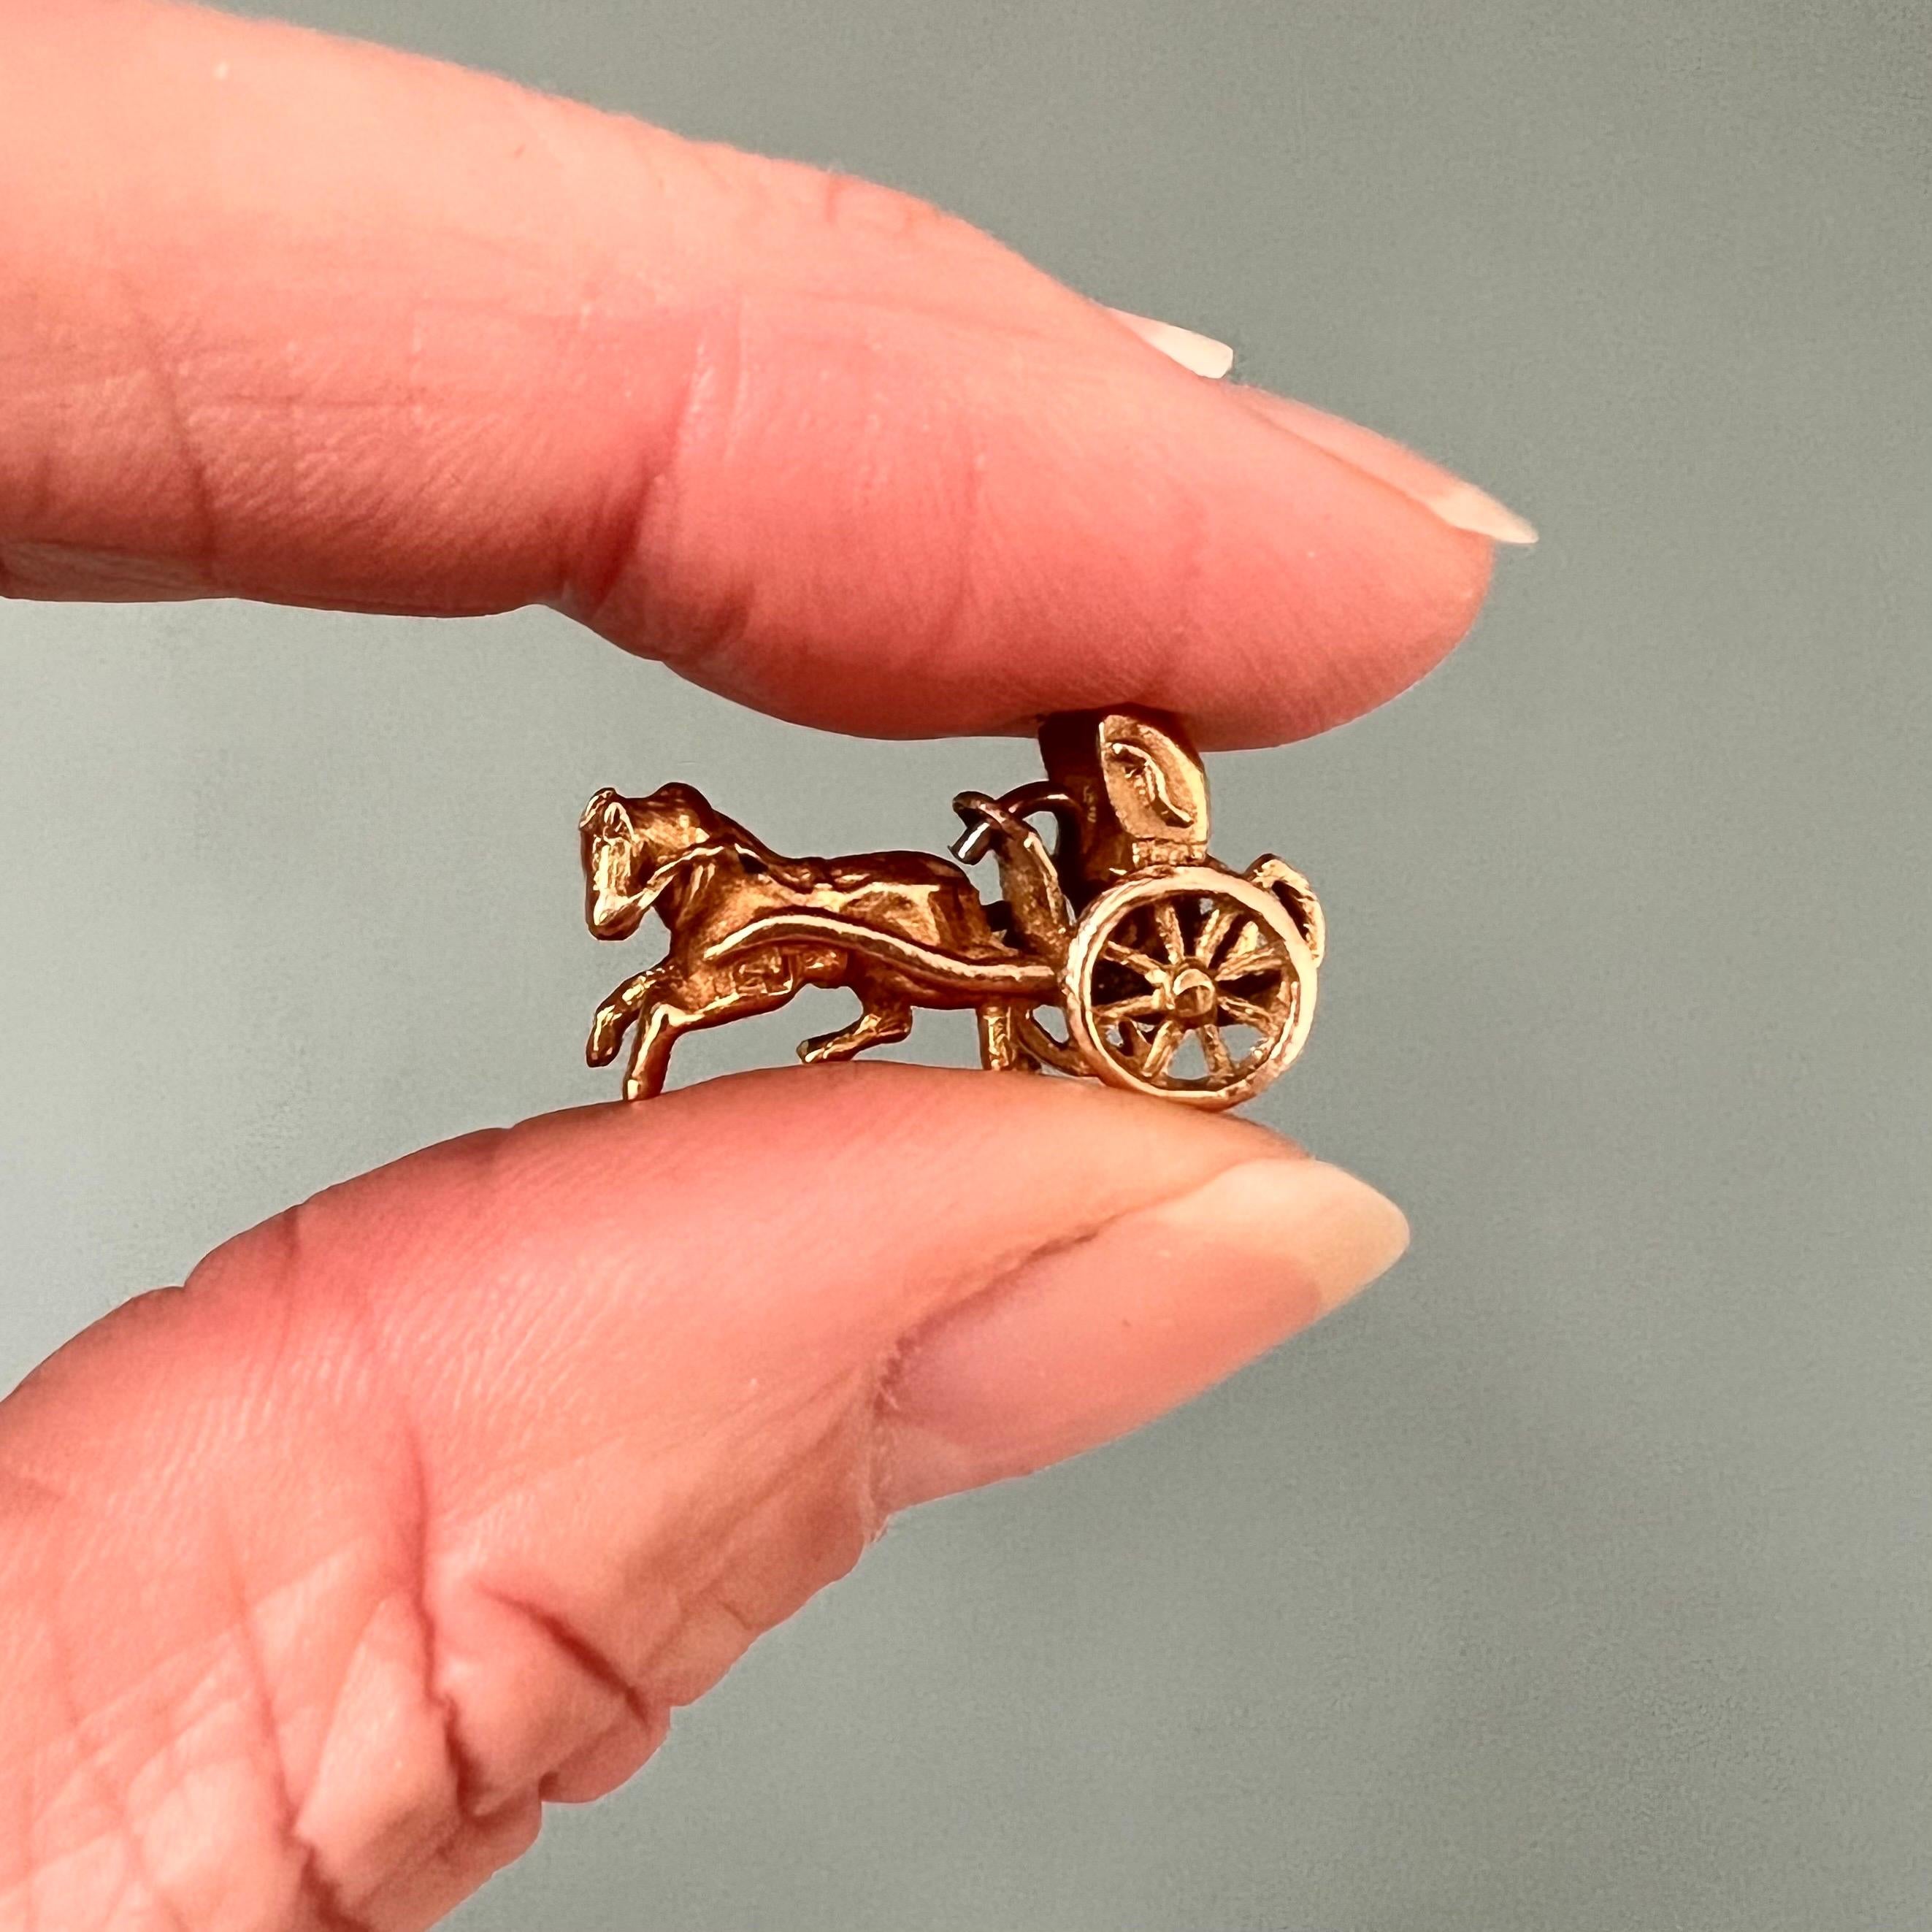 This is a vintage 9 karat yellow gold horse and carriage charm pendant. The carriage is beautifully made with a harnessed horse pulling the carriage. This horse carriage is nicely detailed.

Collect your own charms as wearable memories, it has a